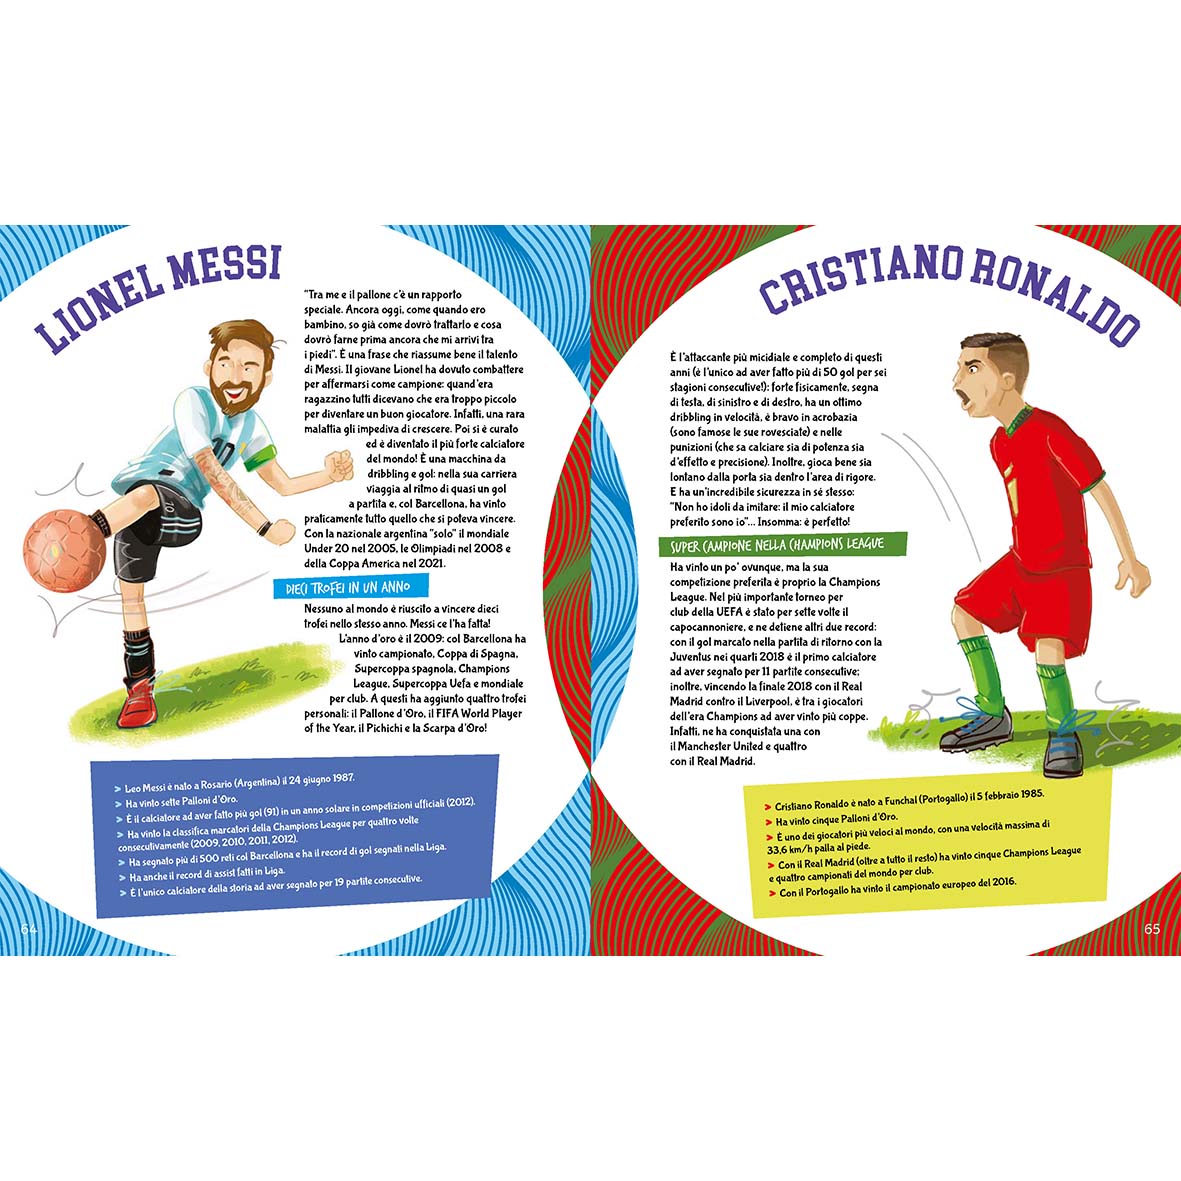 Football explained to children - small illustrated guide (new 2023 edition)